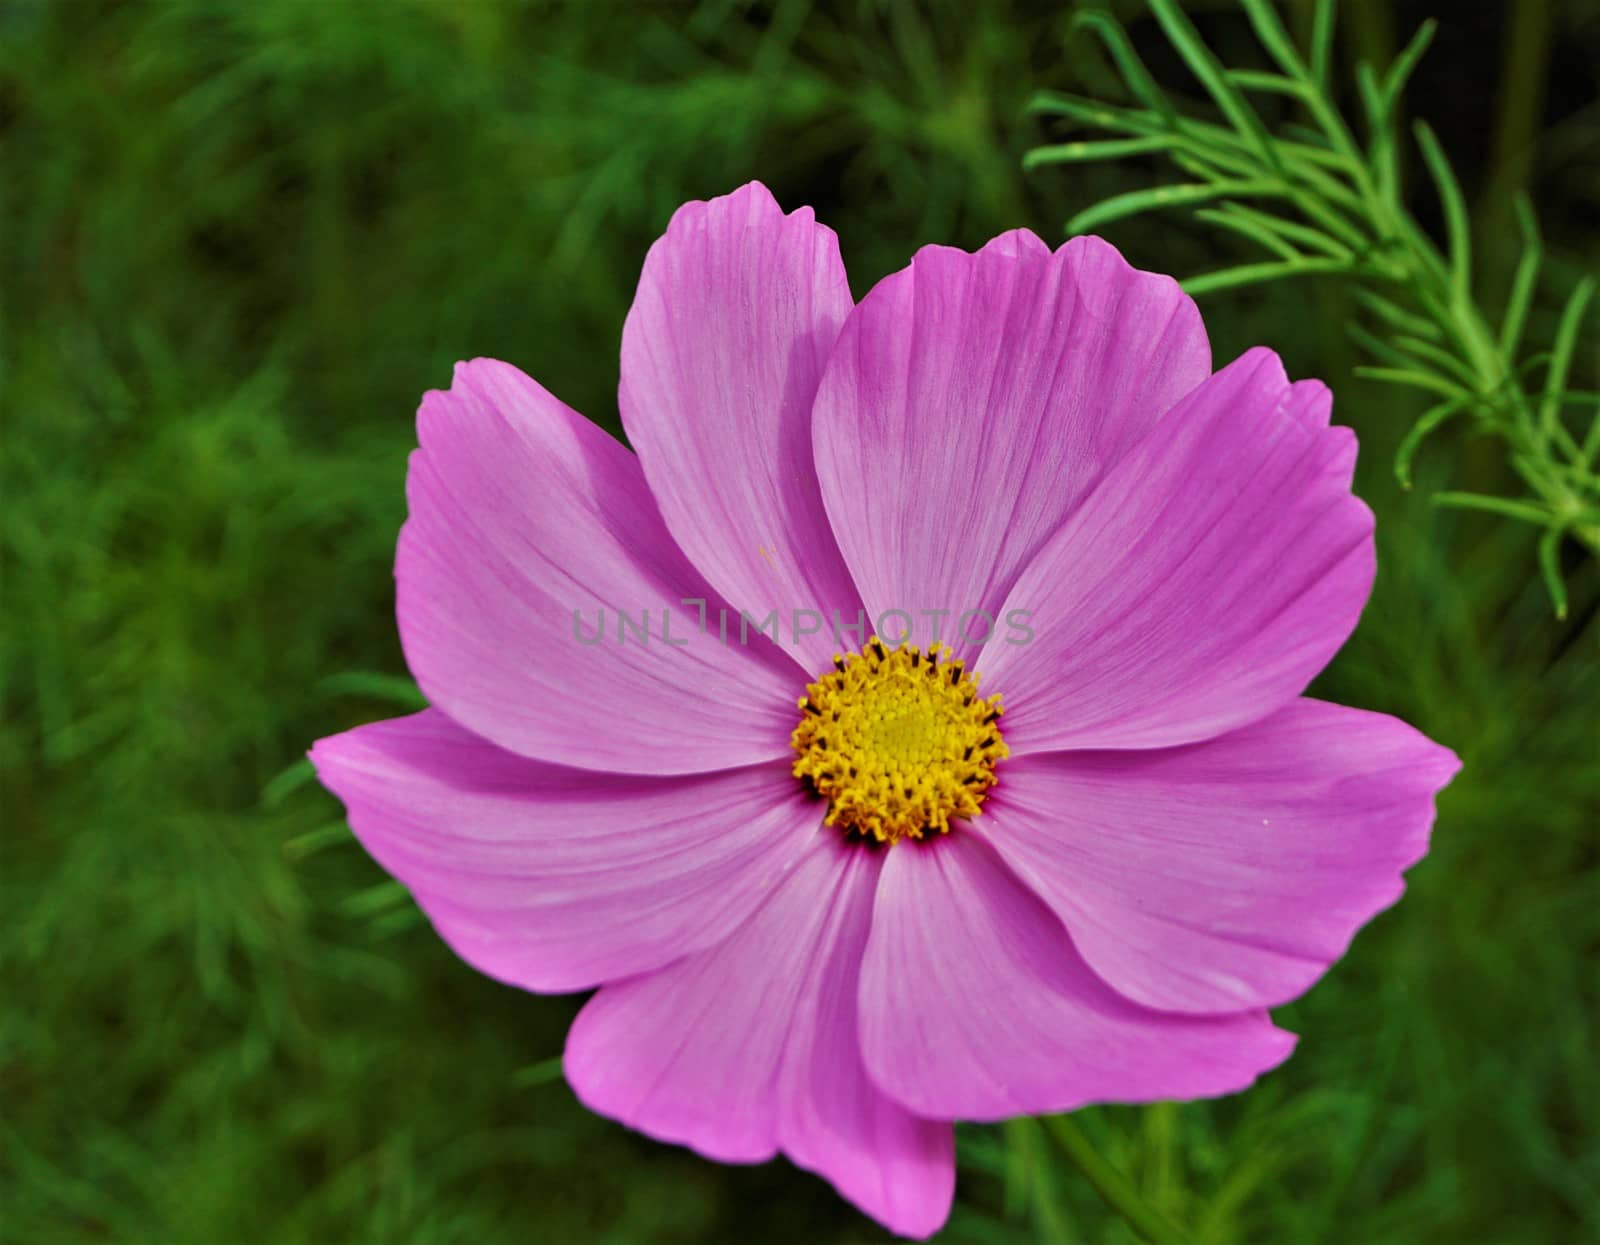 Beautiful pink blossom of the garden cosmos Cosmos bipinnatus with yellow florets